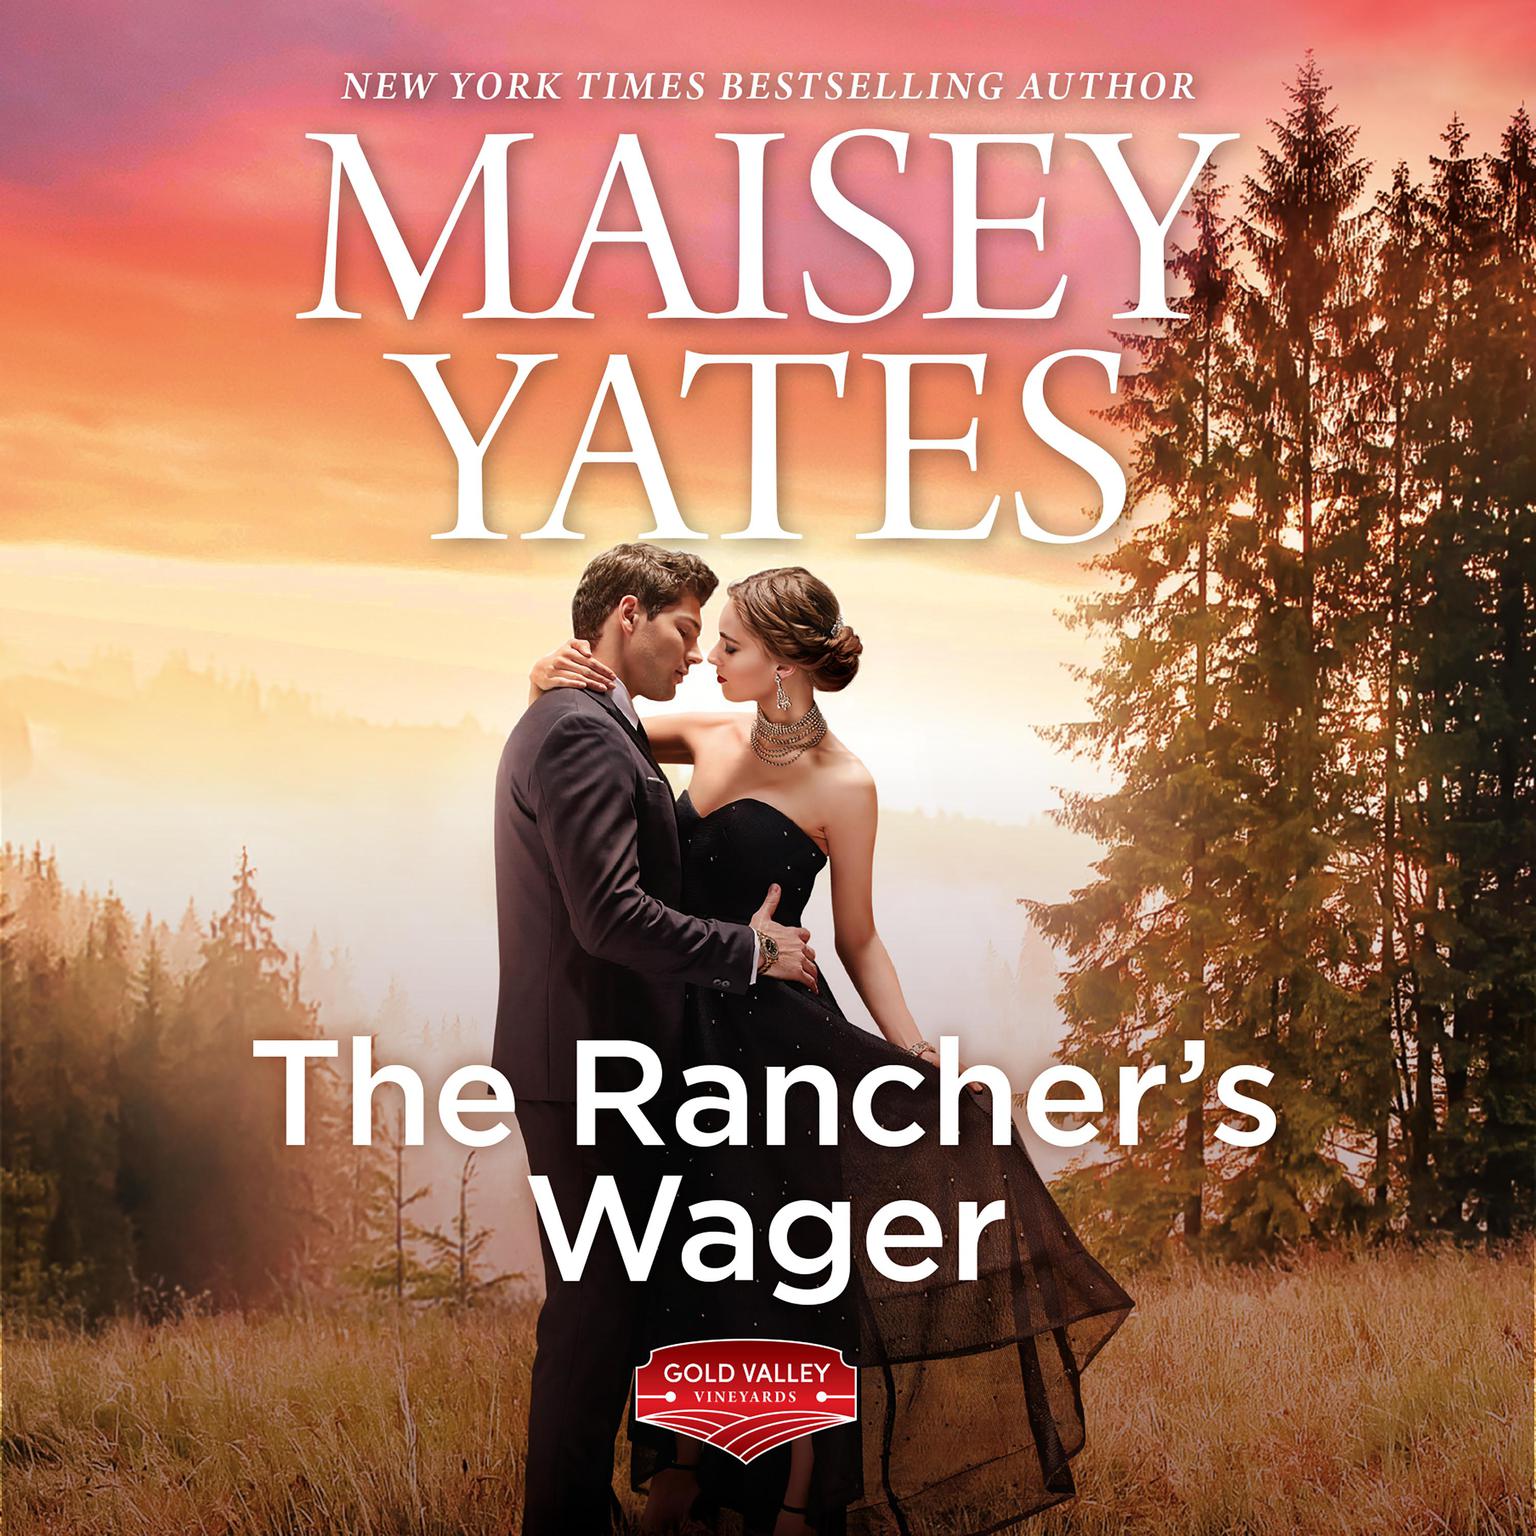 The Ranchers Wager Audiobook, by Maisey Yates